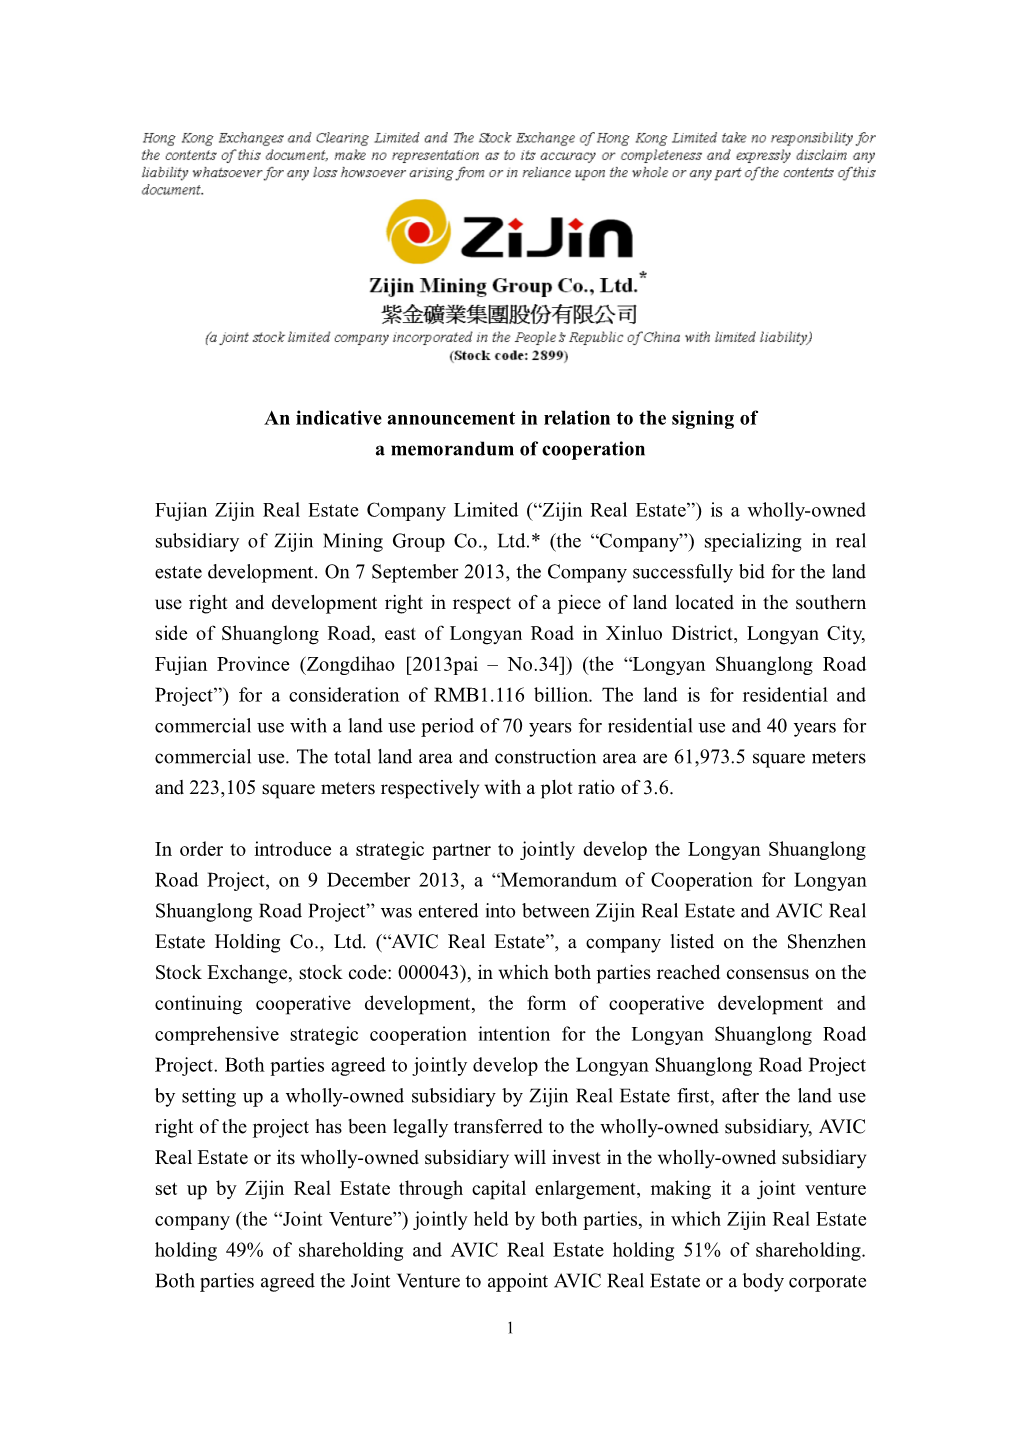 An Indicative Announcement in Relation to the Signing of a Memorandum of Cooperation